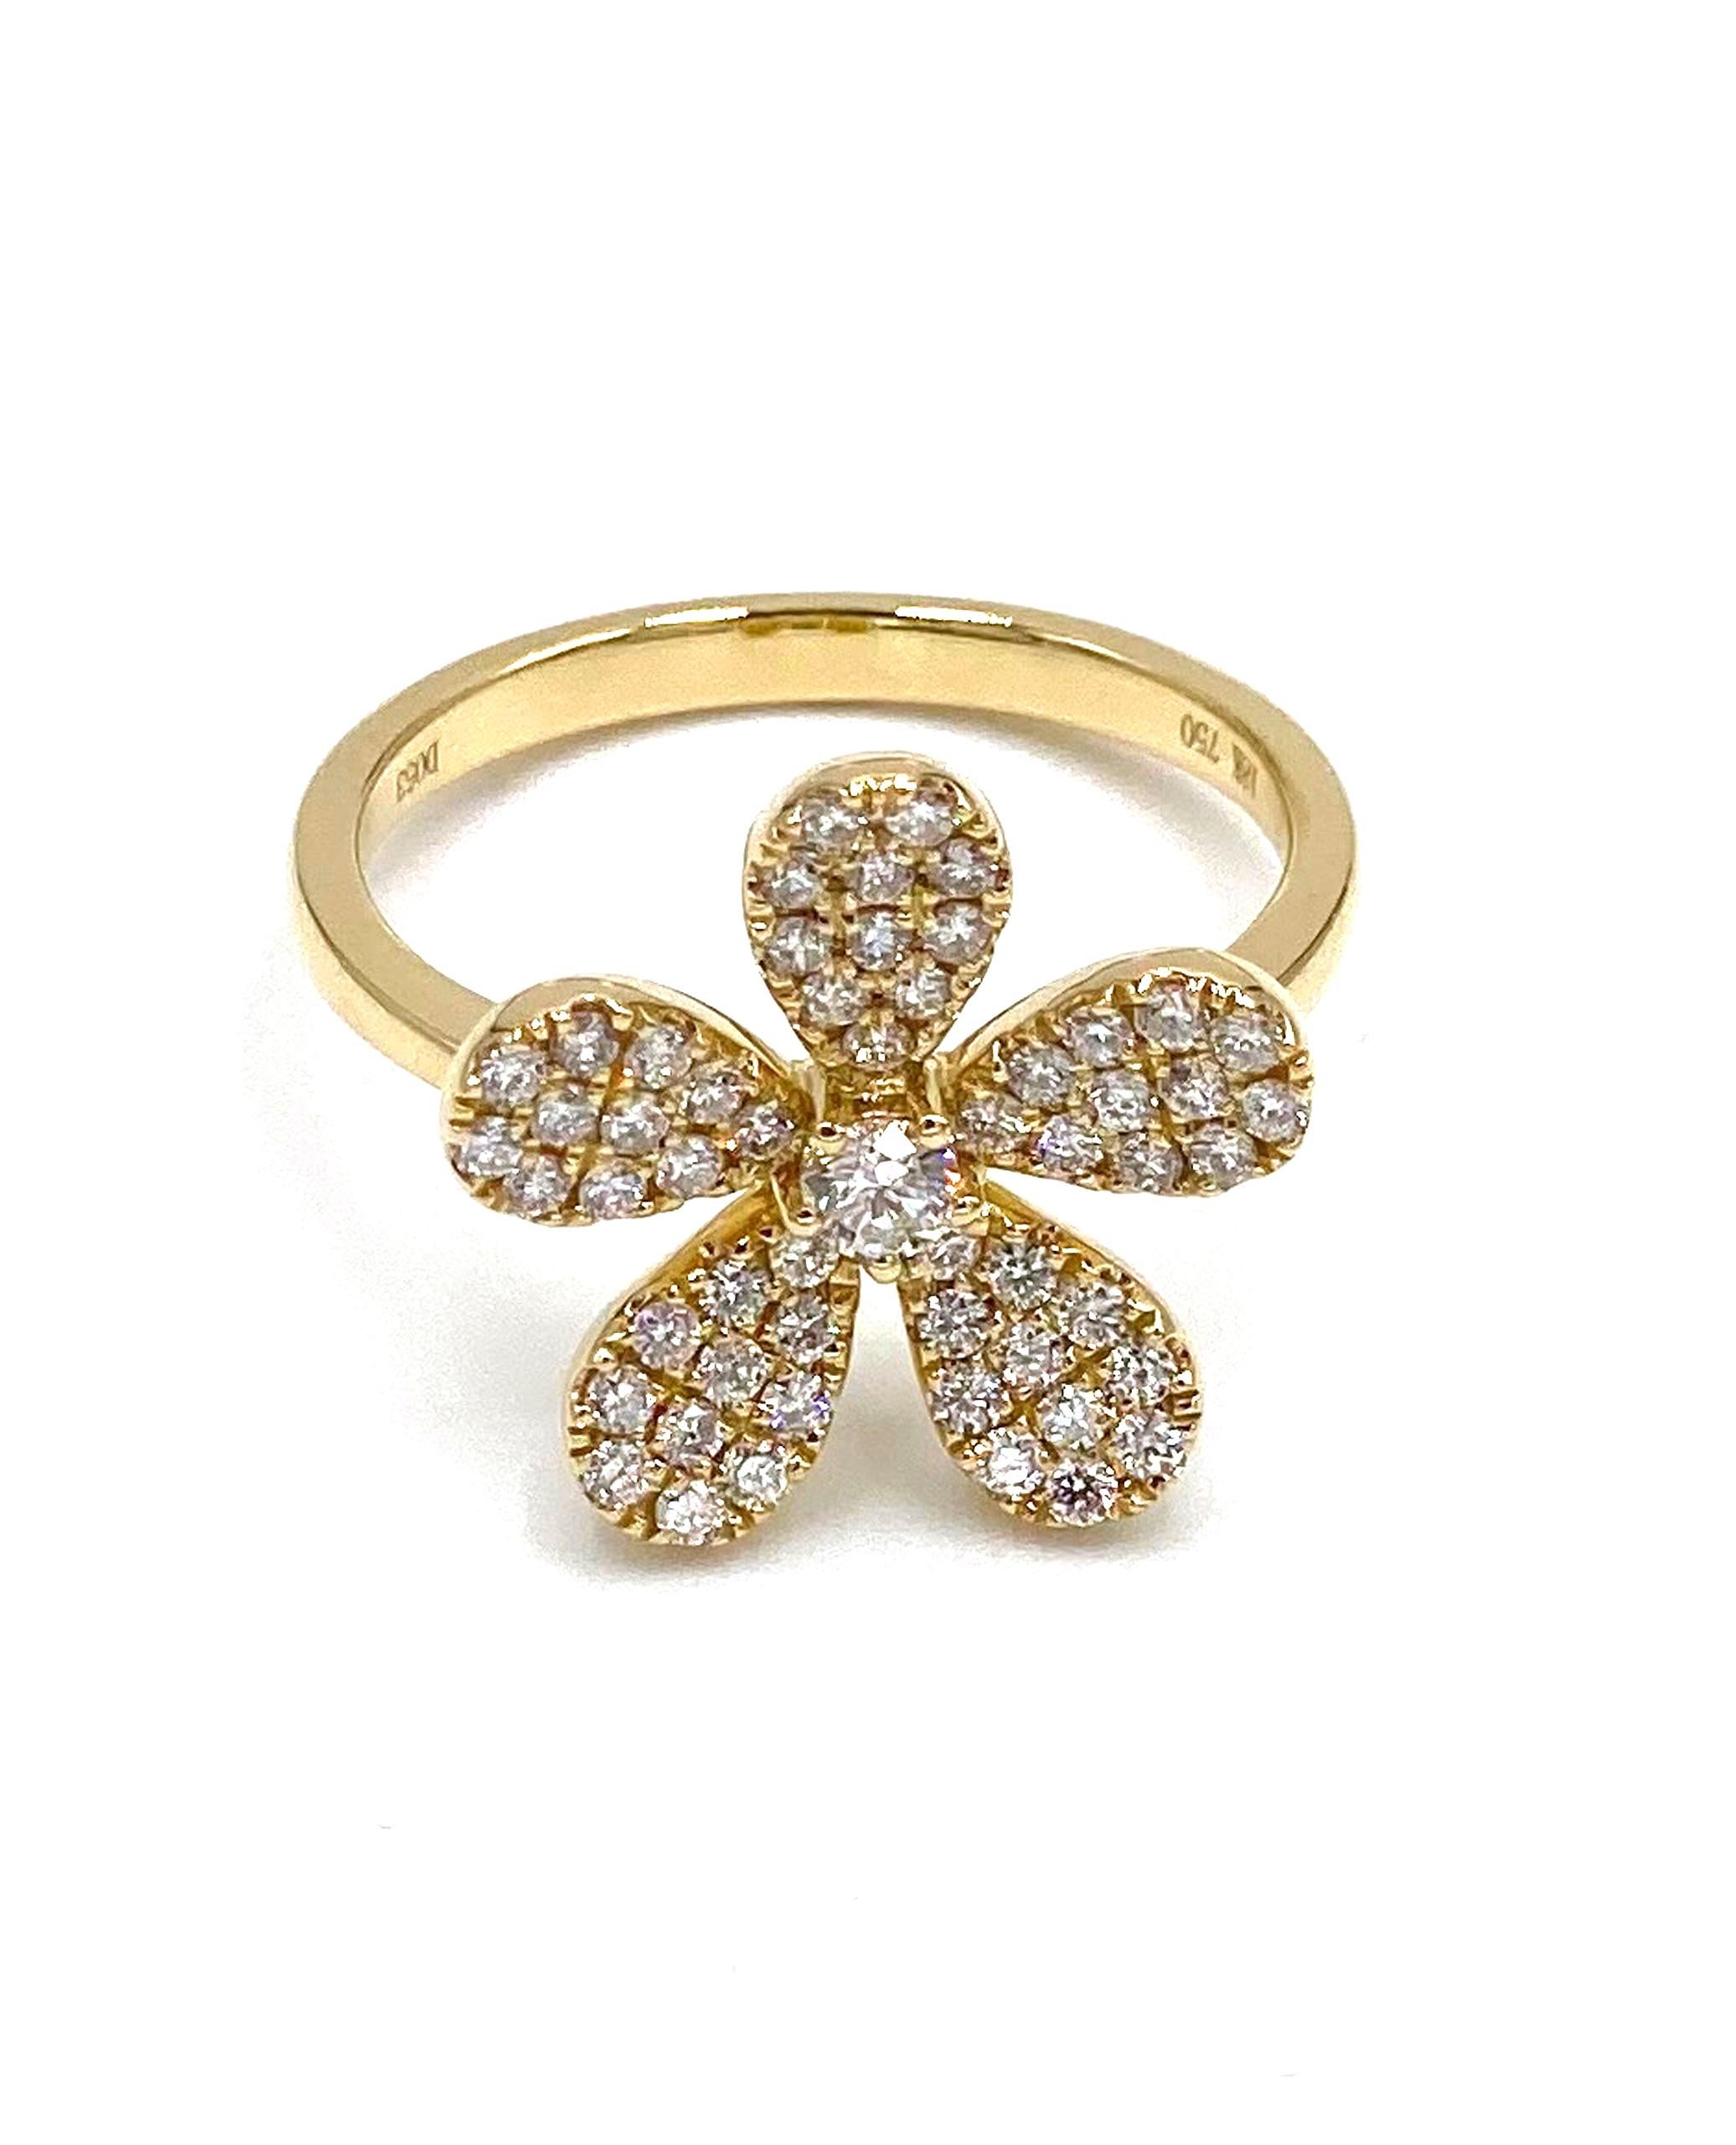 Daisy ring with diamonds totaling 0.57 carats in 18K yellow gold.

- Finger size 6.5